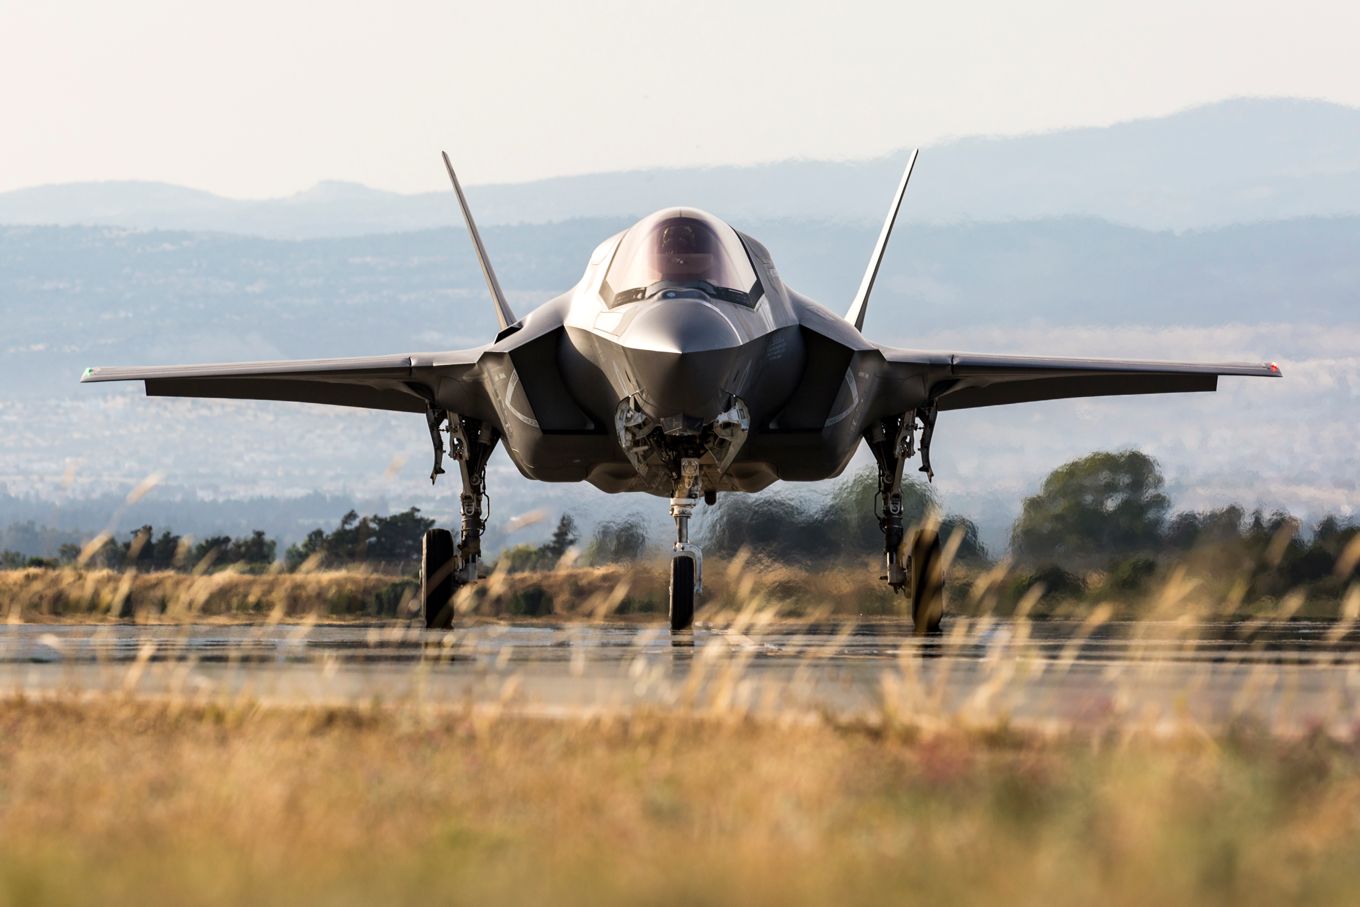 Image shows an RAF F-35B Lightning aircraft on the ground.